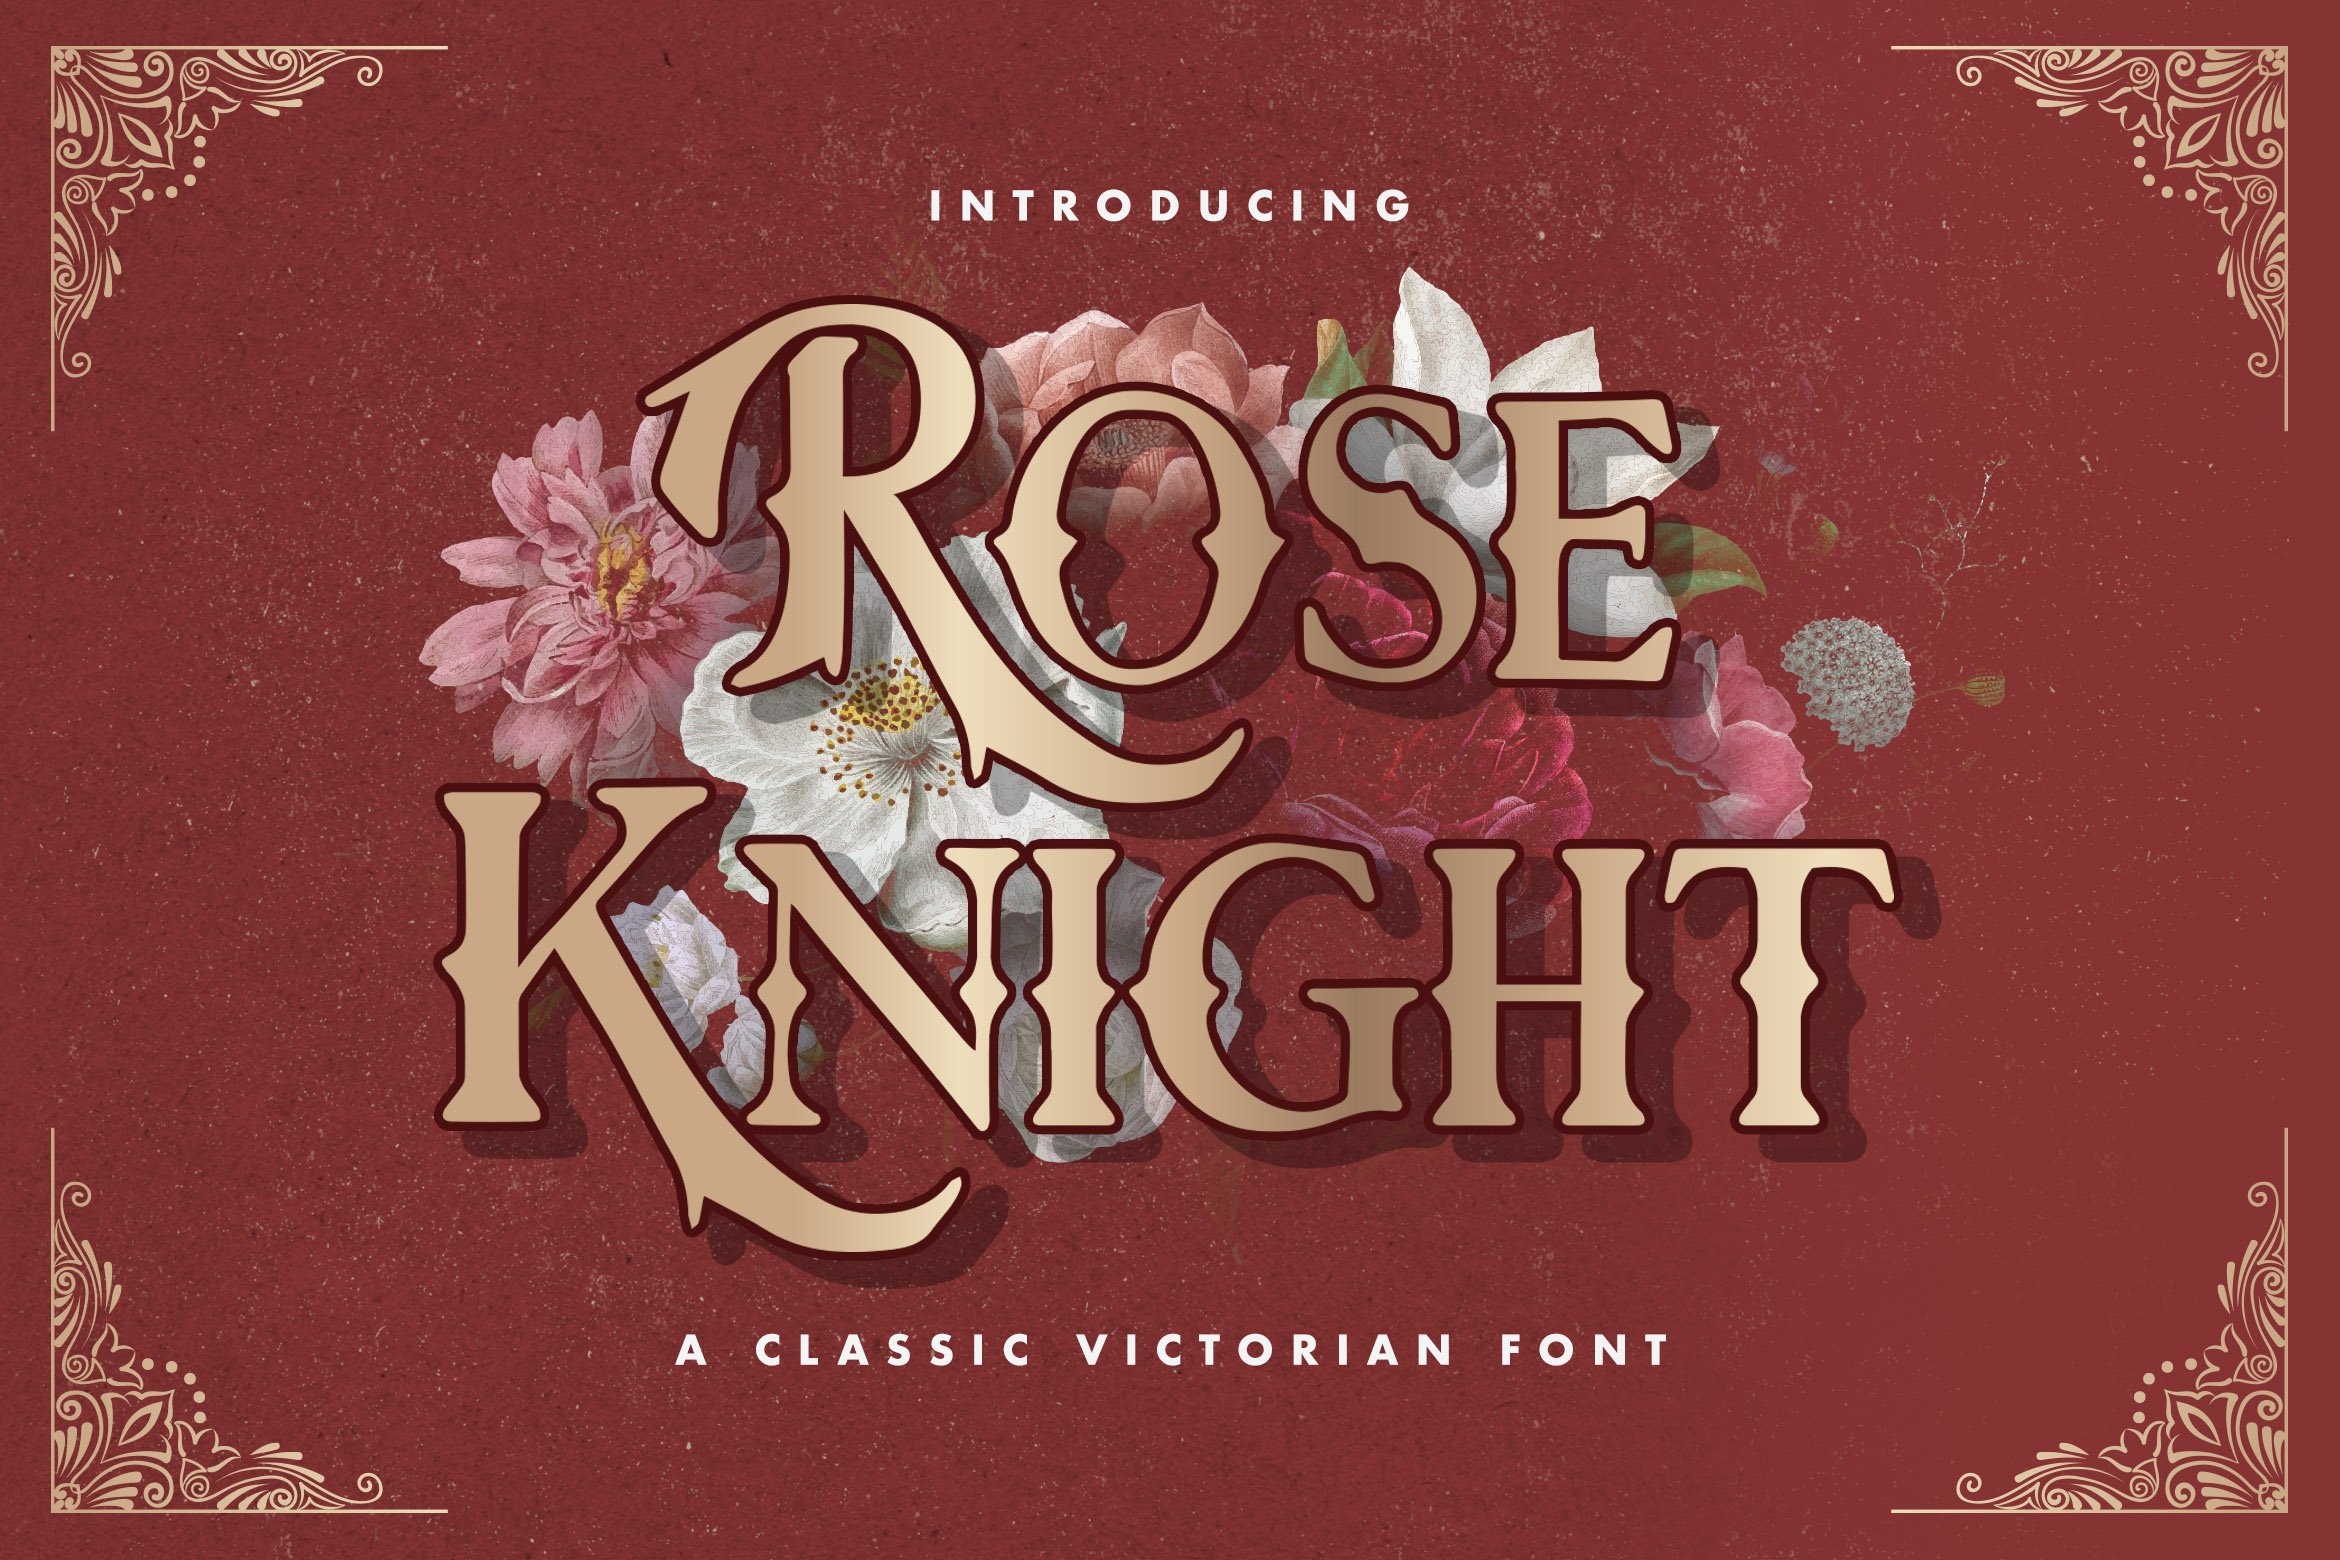 Rose Knight - Victorian Style Font cover image.